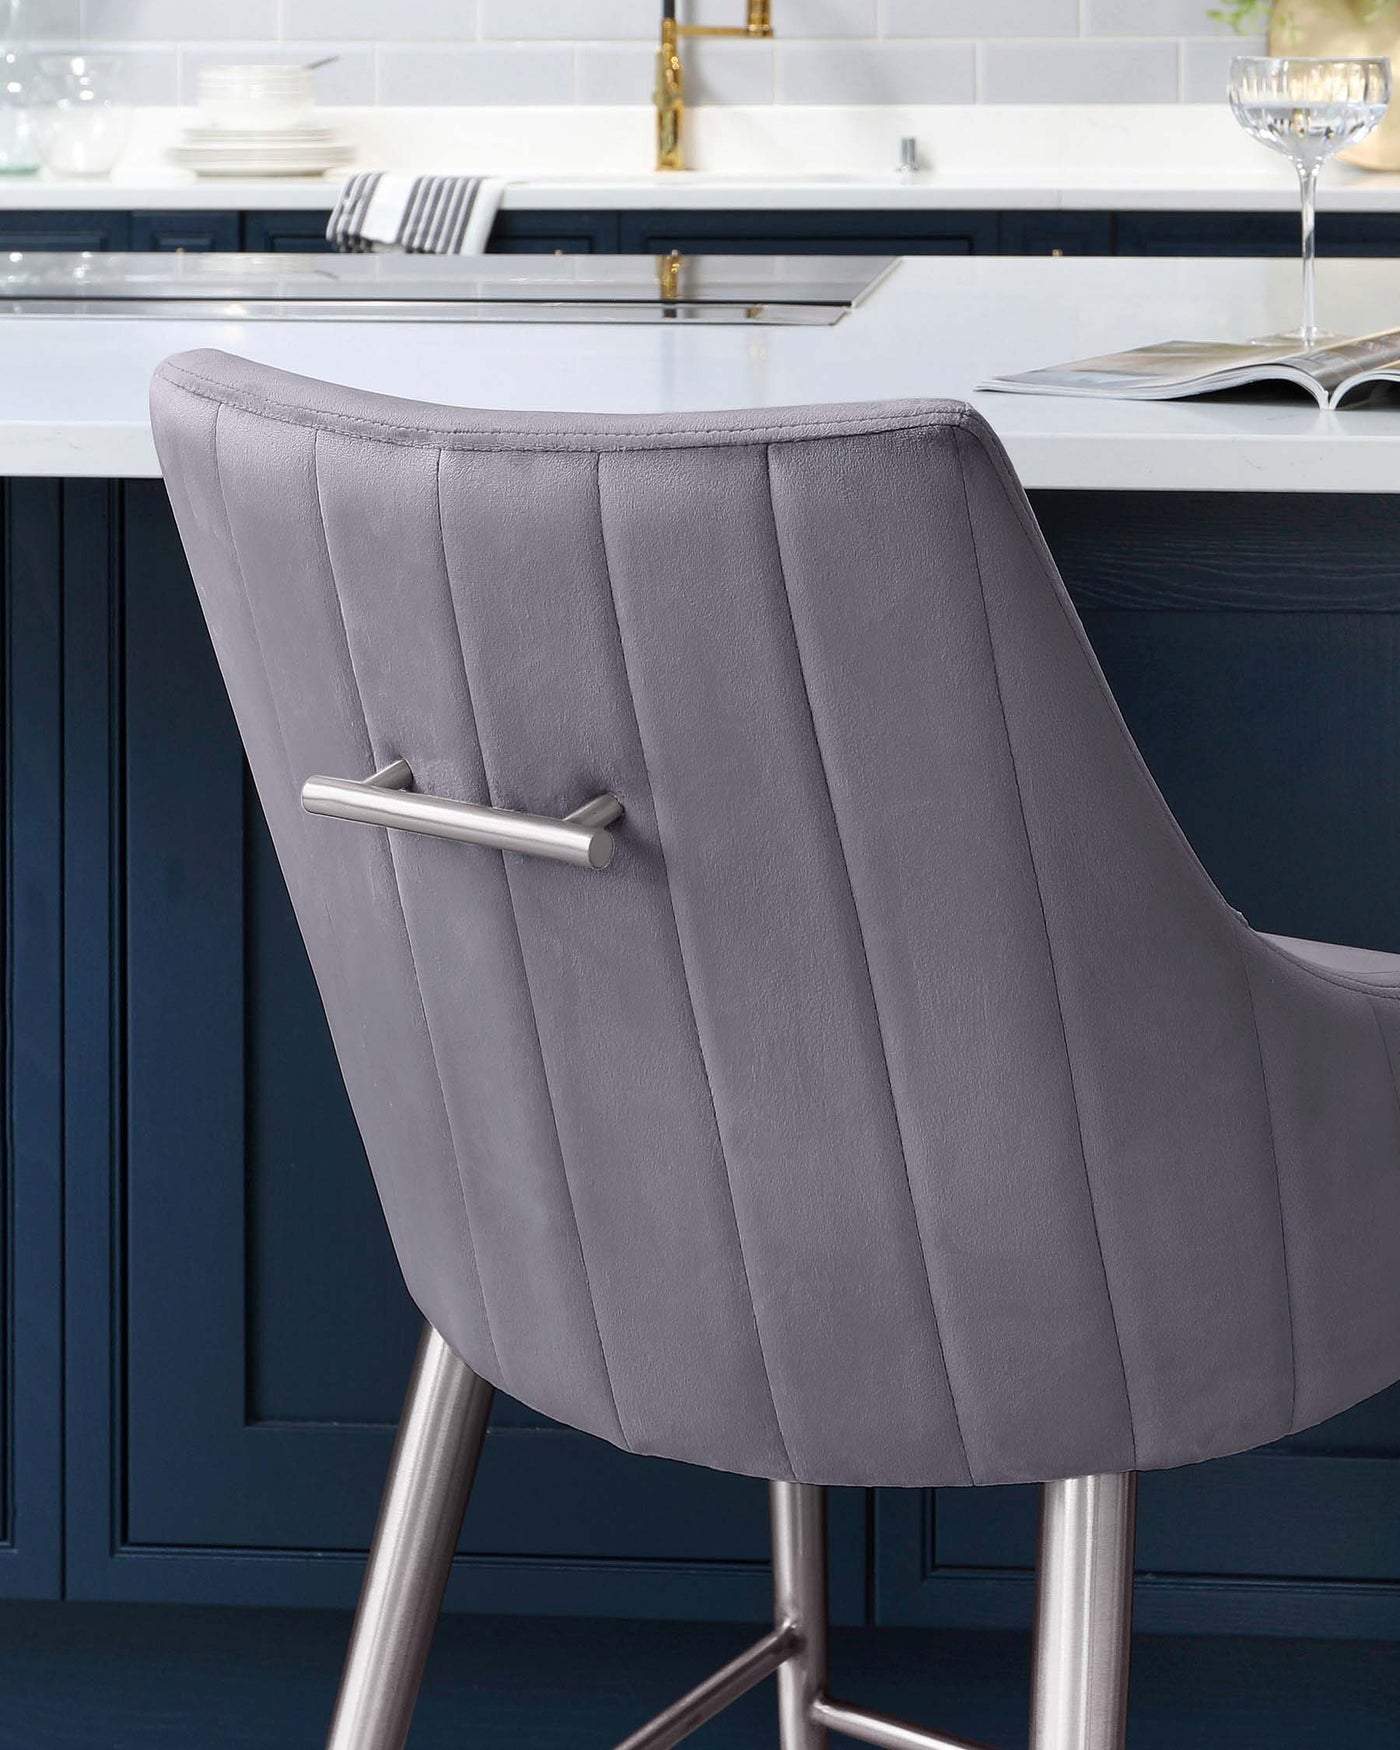 Elegant modern bar stool with a high backrest, upholstered in a soft grey fabric with vertical stitching, featuring a sleek chrome pedestal base with a footrest.